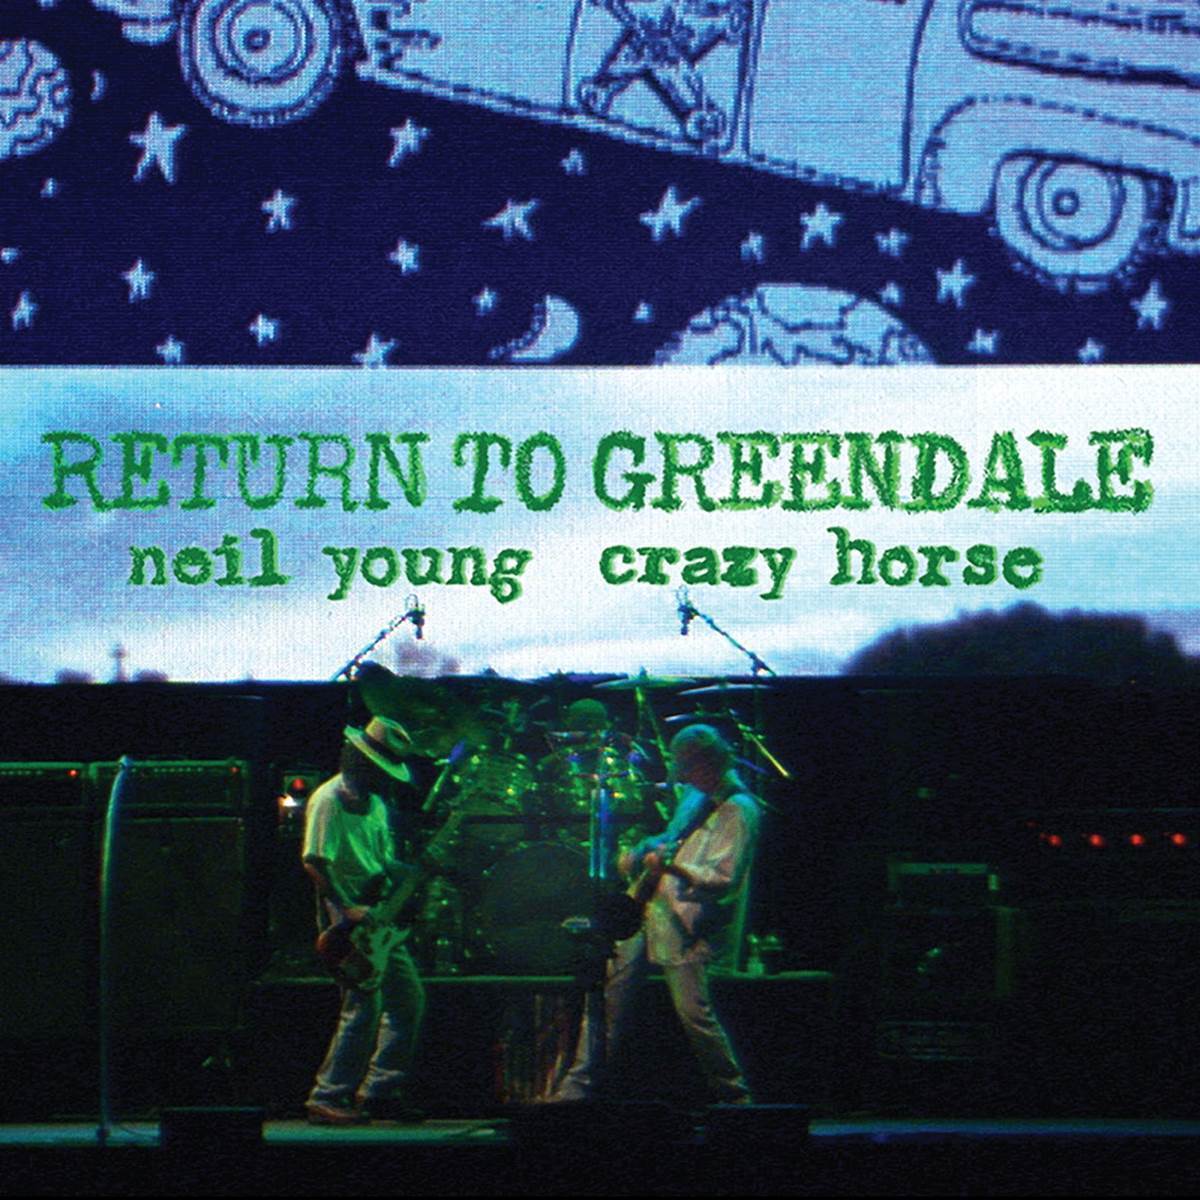 This cover image released by Reprise Records shows "Return to Greendale" by Neil Young. (Reprise Records via AP)